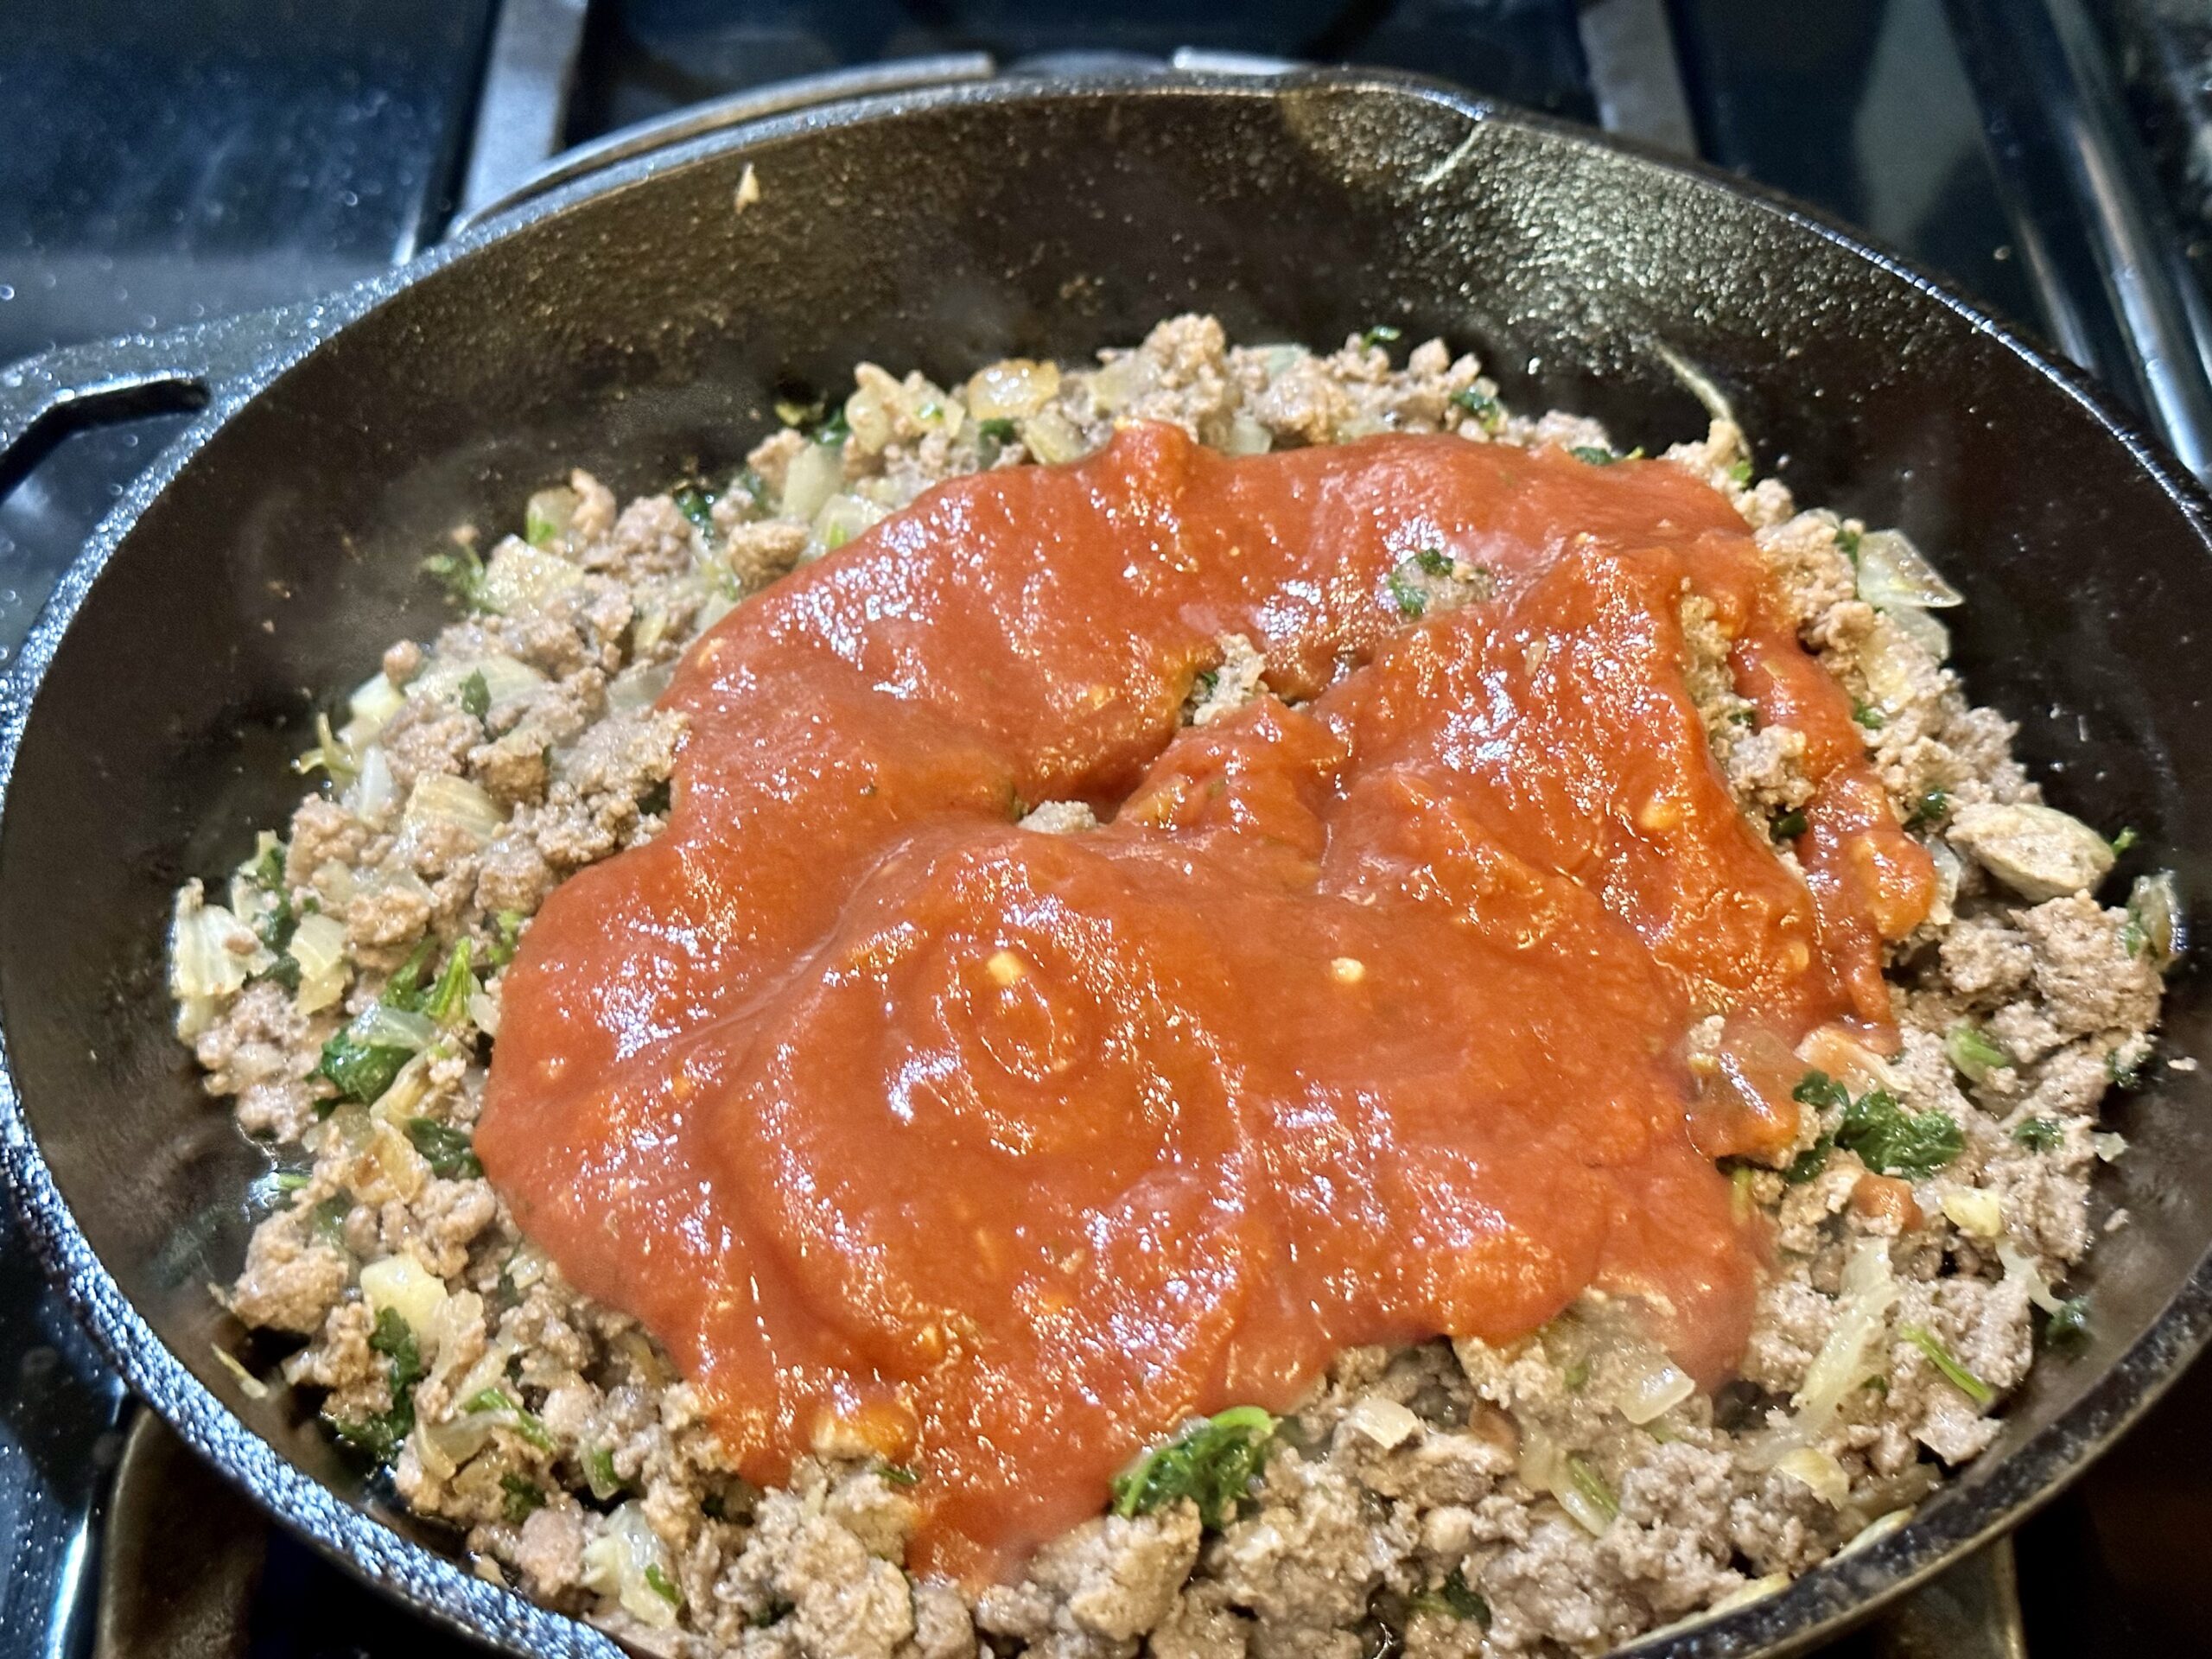 pasta sauce is added to the skillet.